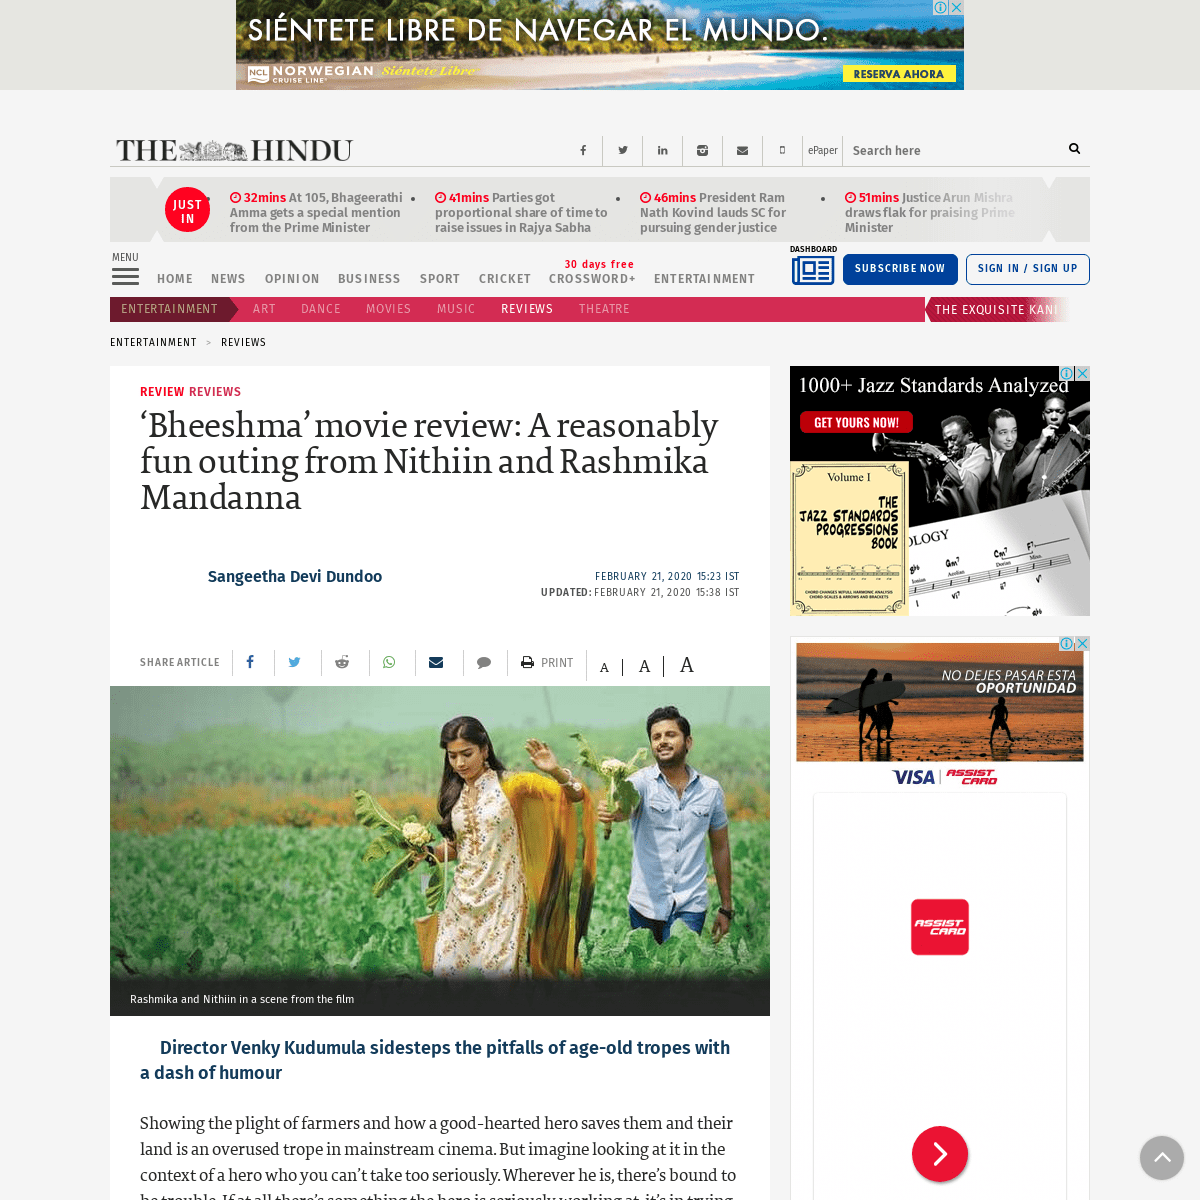 A complete backup of www.thehindu.com/entertainment/reviews/bheeshma-review-this-nithiin-rashmika-starrer-directed-by-venky-kudu